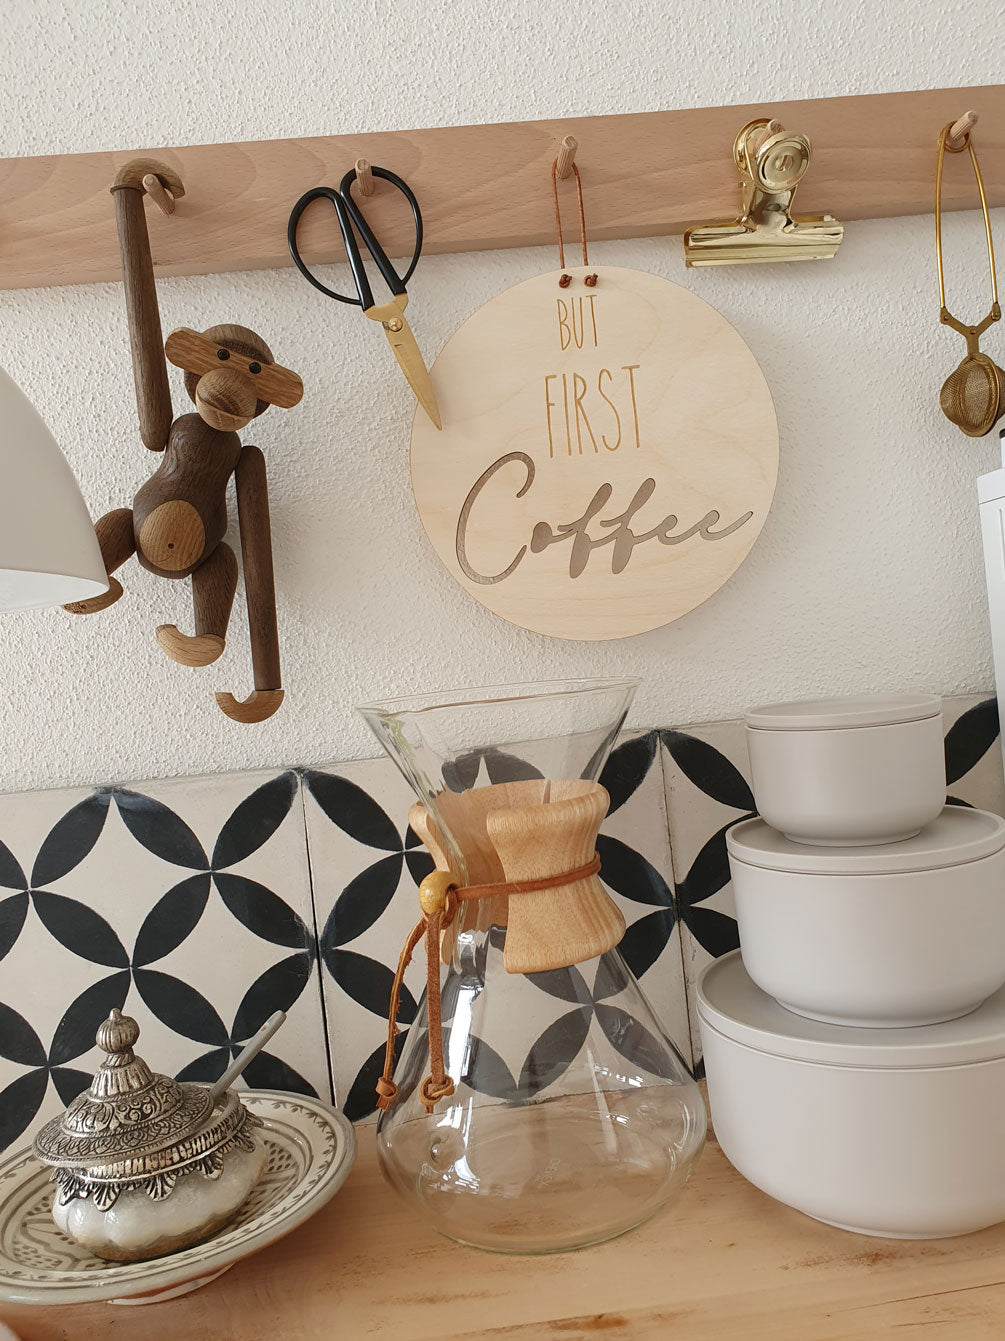 Holzschild "BUT FIRST Coffee"